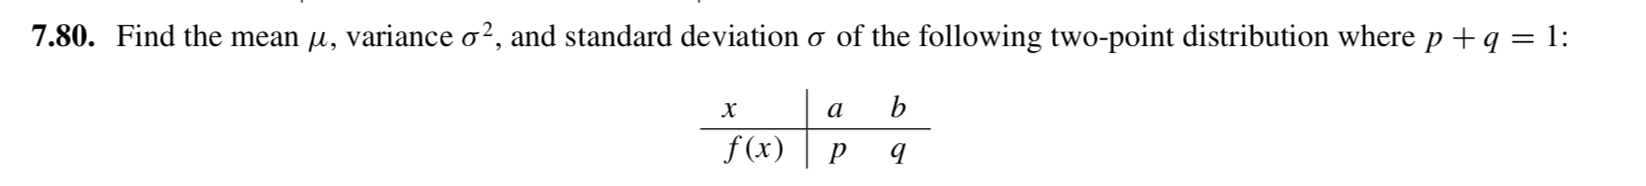 Find the mean µ, variance o?, and standard deviation o of the following two-point distribution where p + q = 1:
а
f(x)
